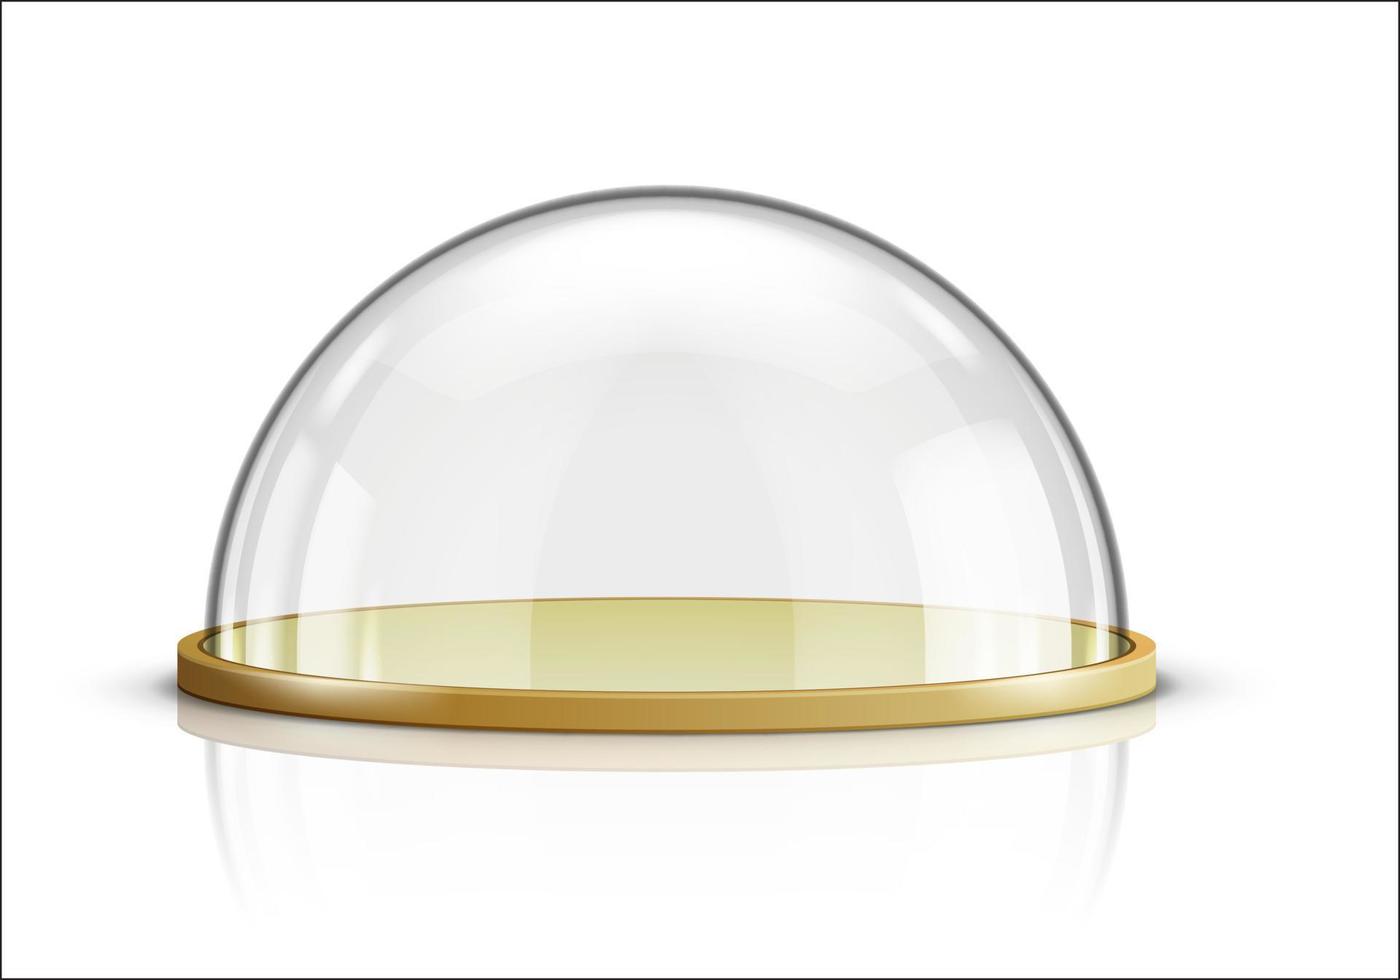 Glass dome and wooden tray realistic vector